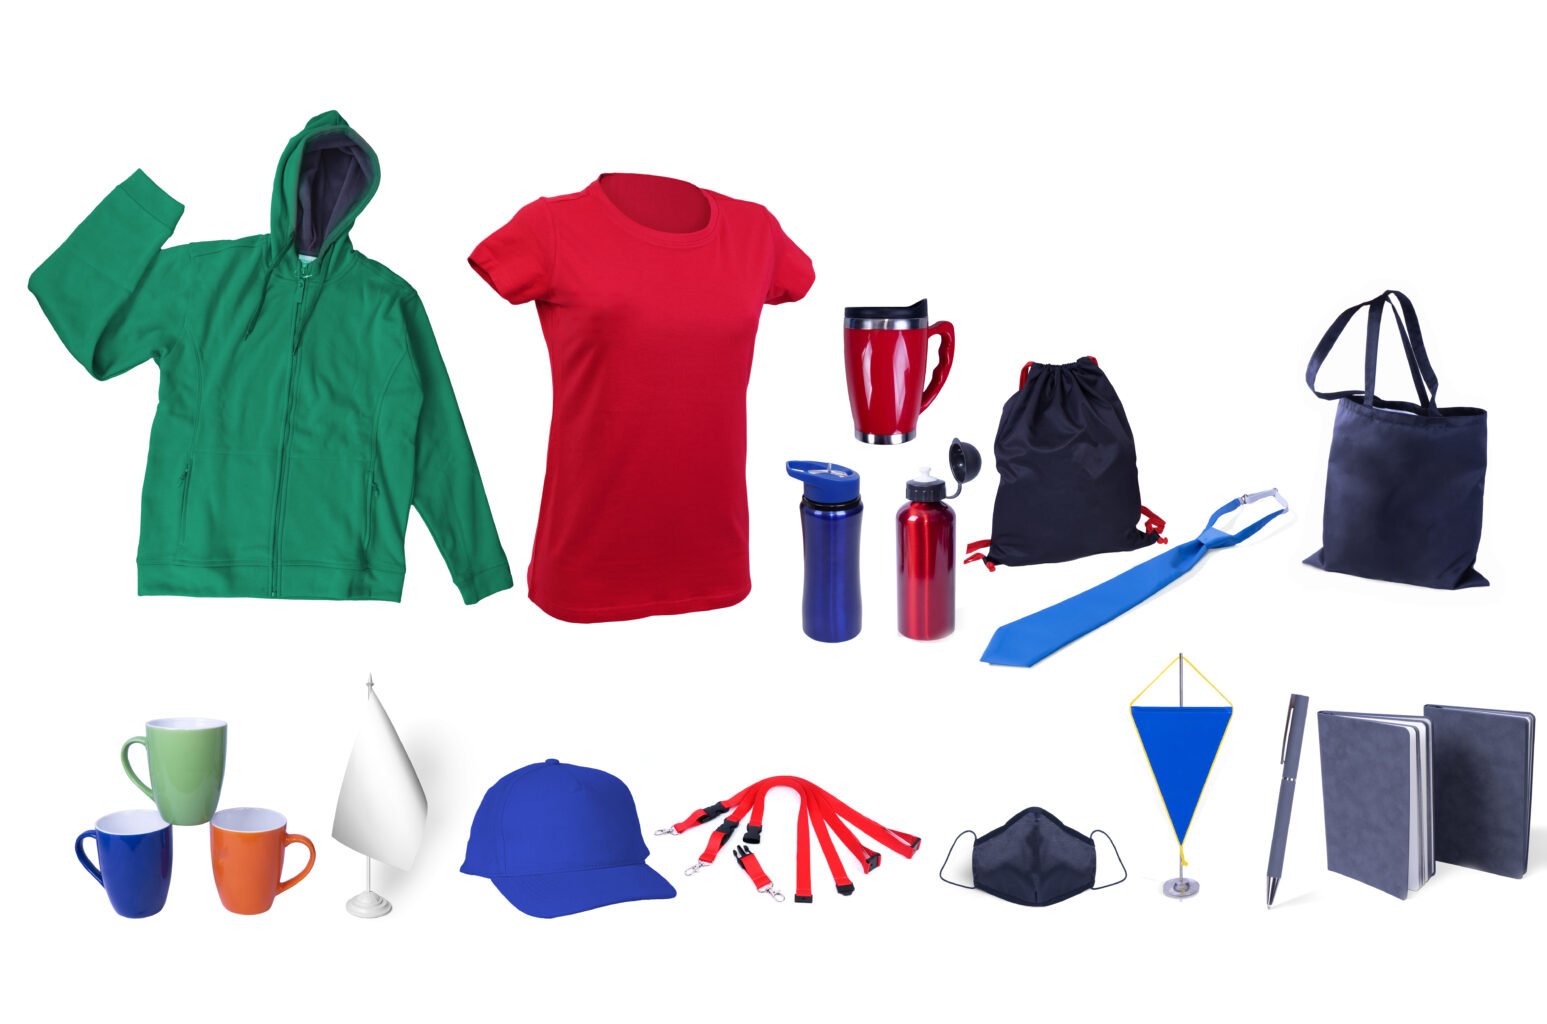 An image of various promotional products.